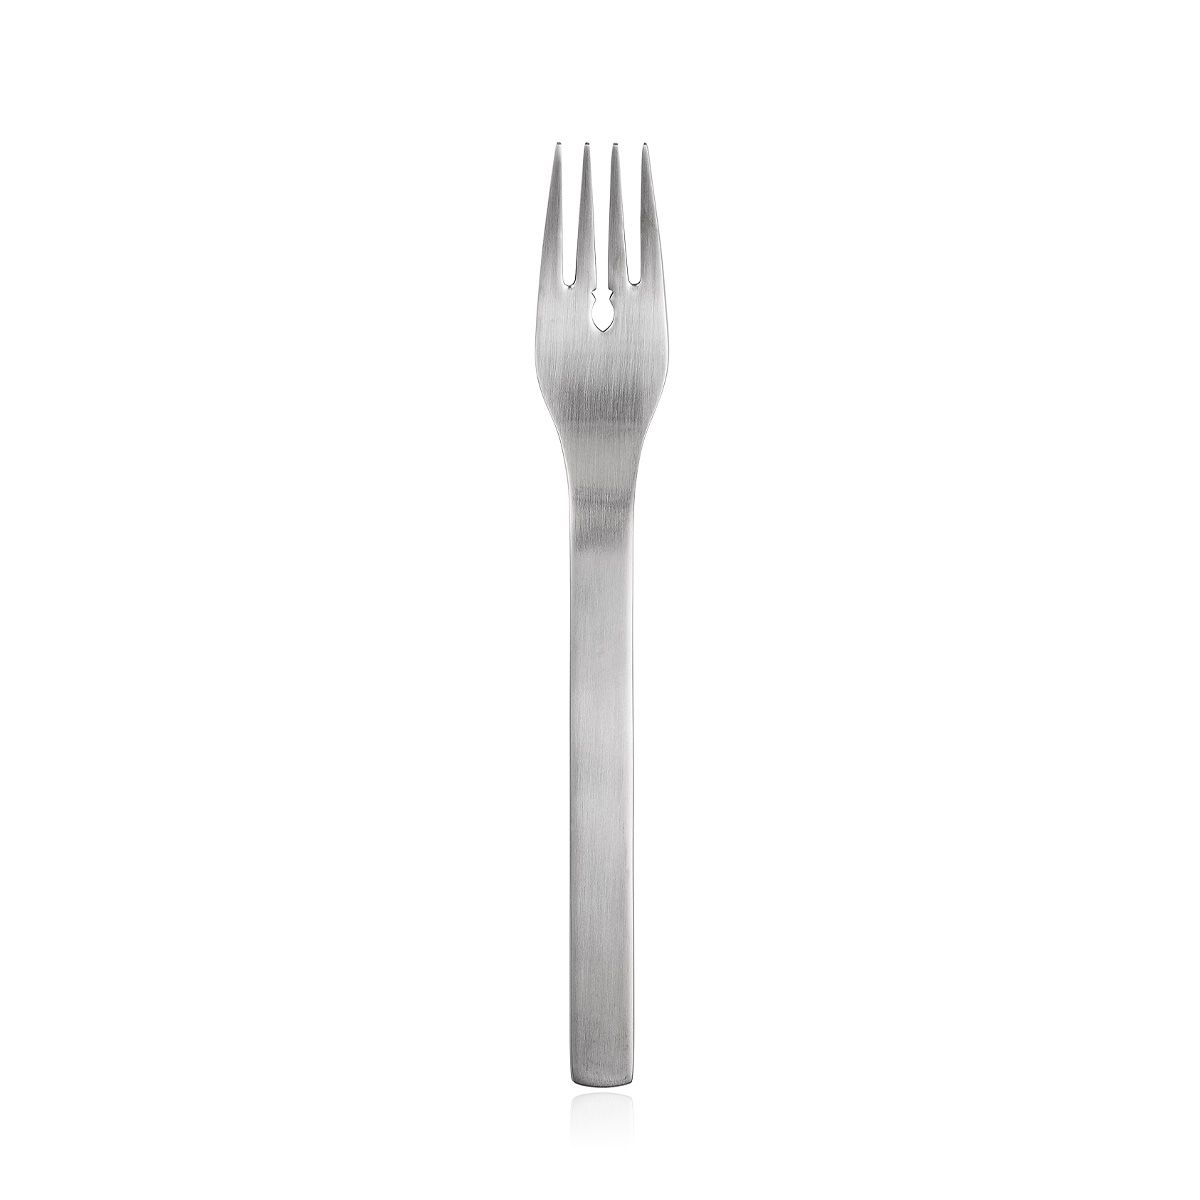 Stainless Steel Brushed 47.5 x 51.3 x 5 cm BODUM Barcelona 48 pcs Cutlery Set s/s 